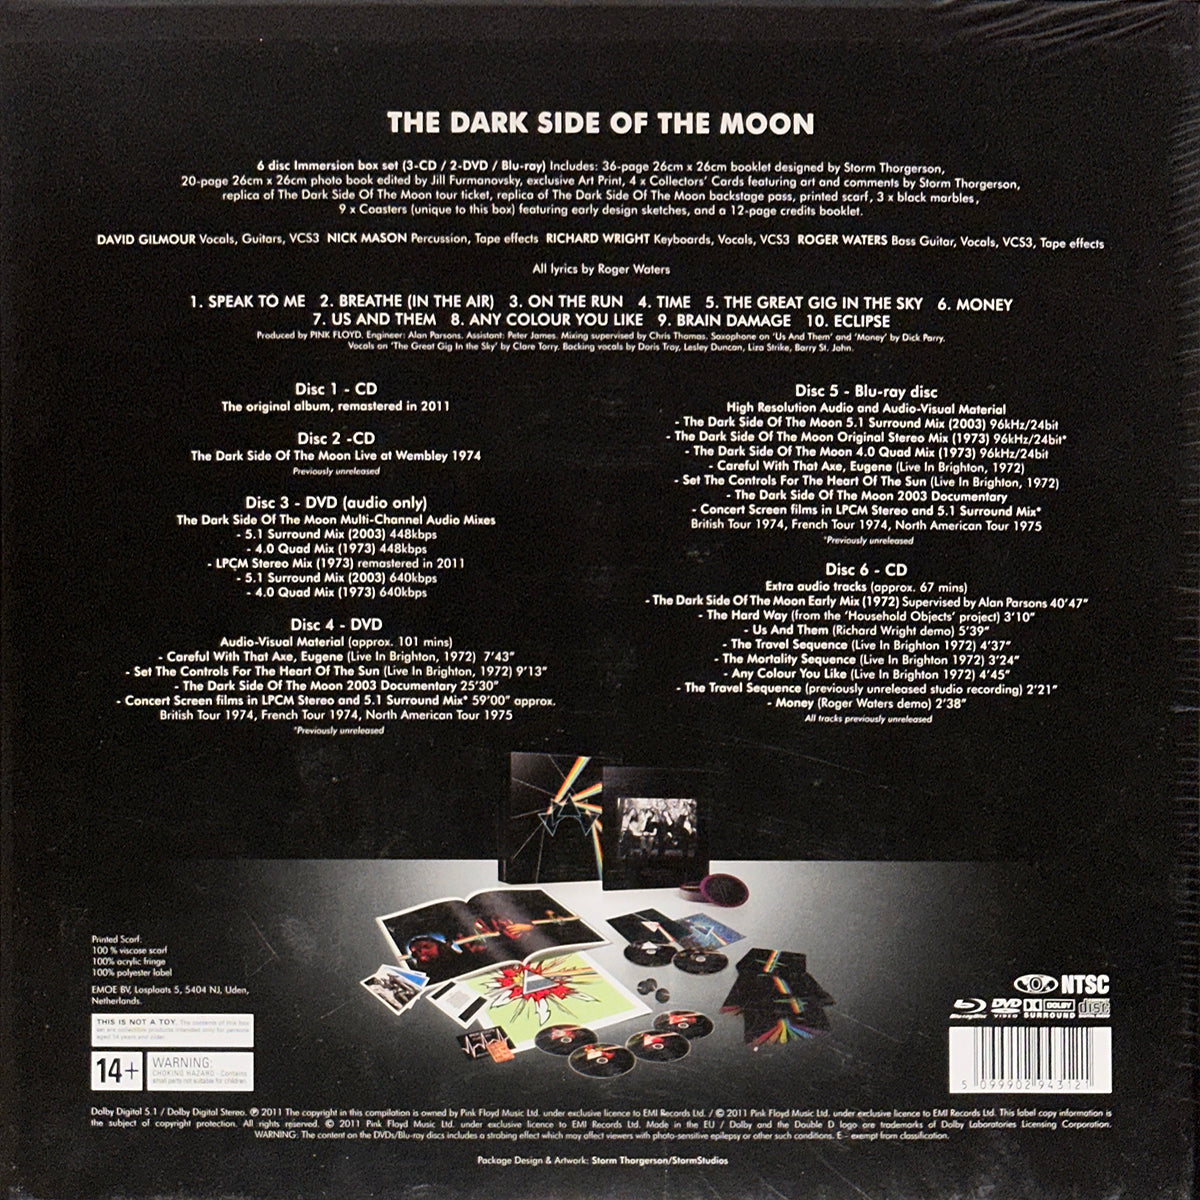 The Dark Side Of The Moon (Immersion Box Set)